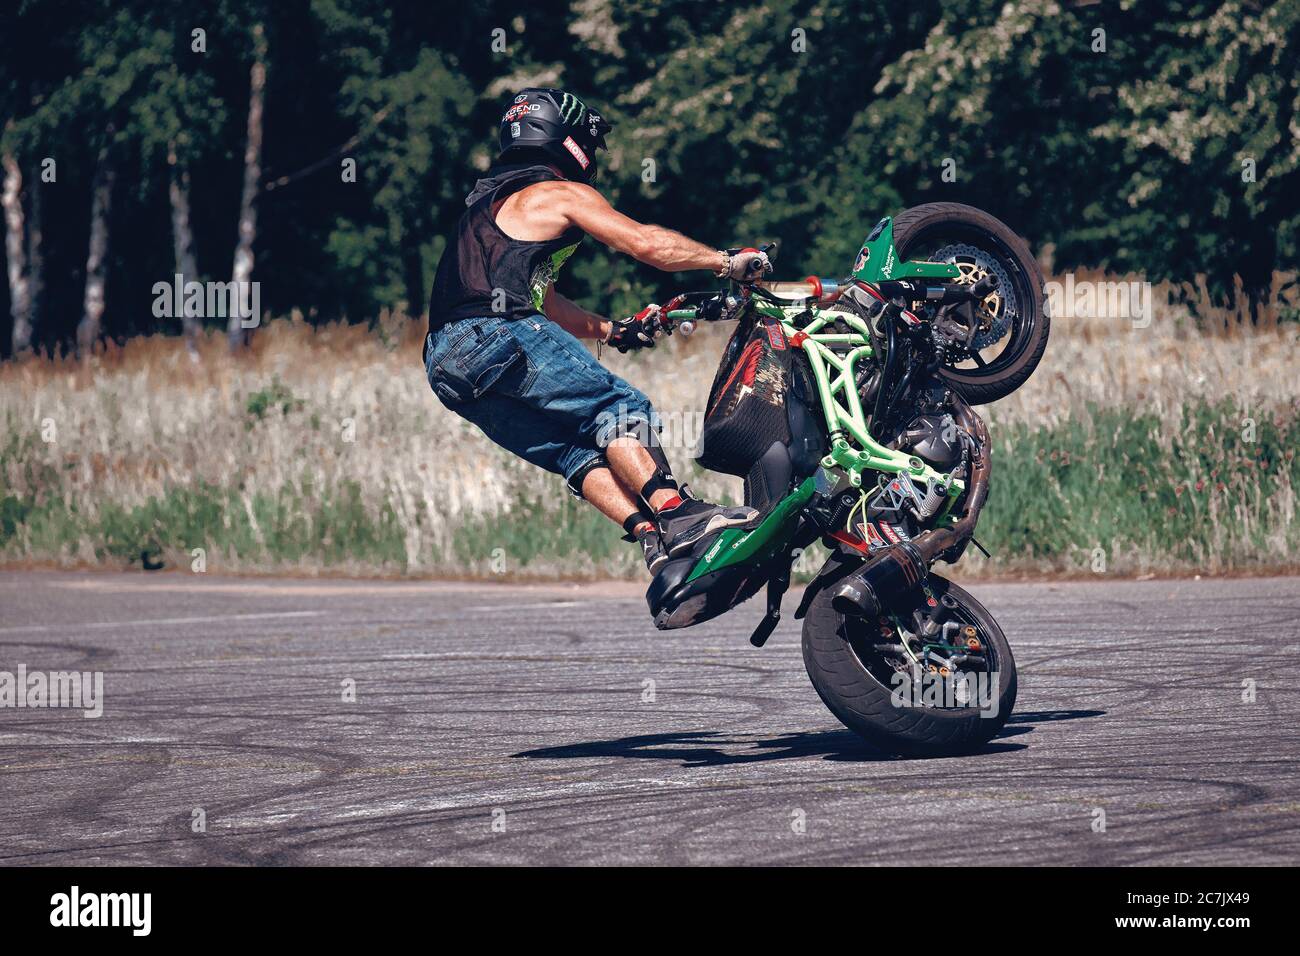 Moscow, Russia - 17 Jul 2020: Moto rider making a stunt on his motorbike.  Motorcyclist making wheelie a difficult and dangerous stunt on his  motorbike Stock Photo - Alamy